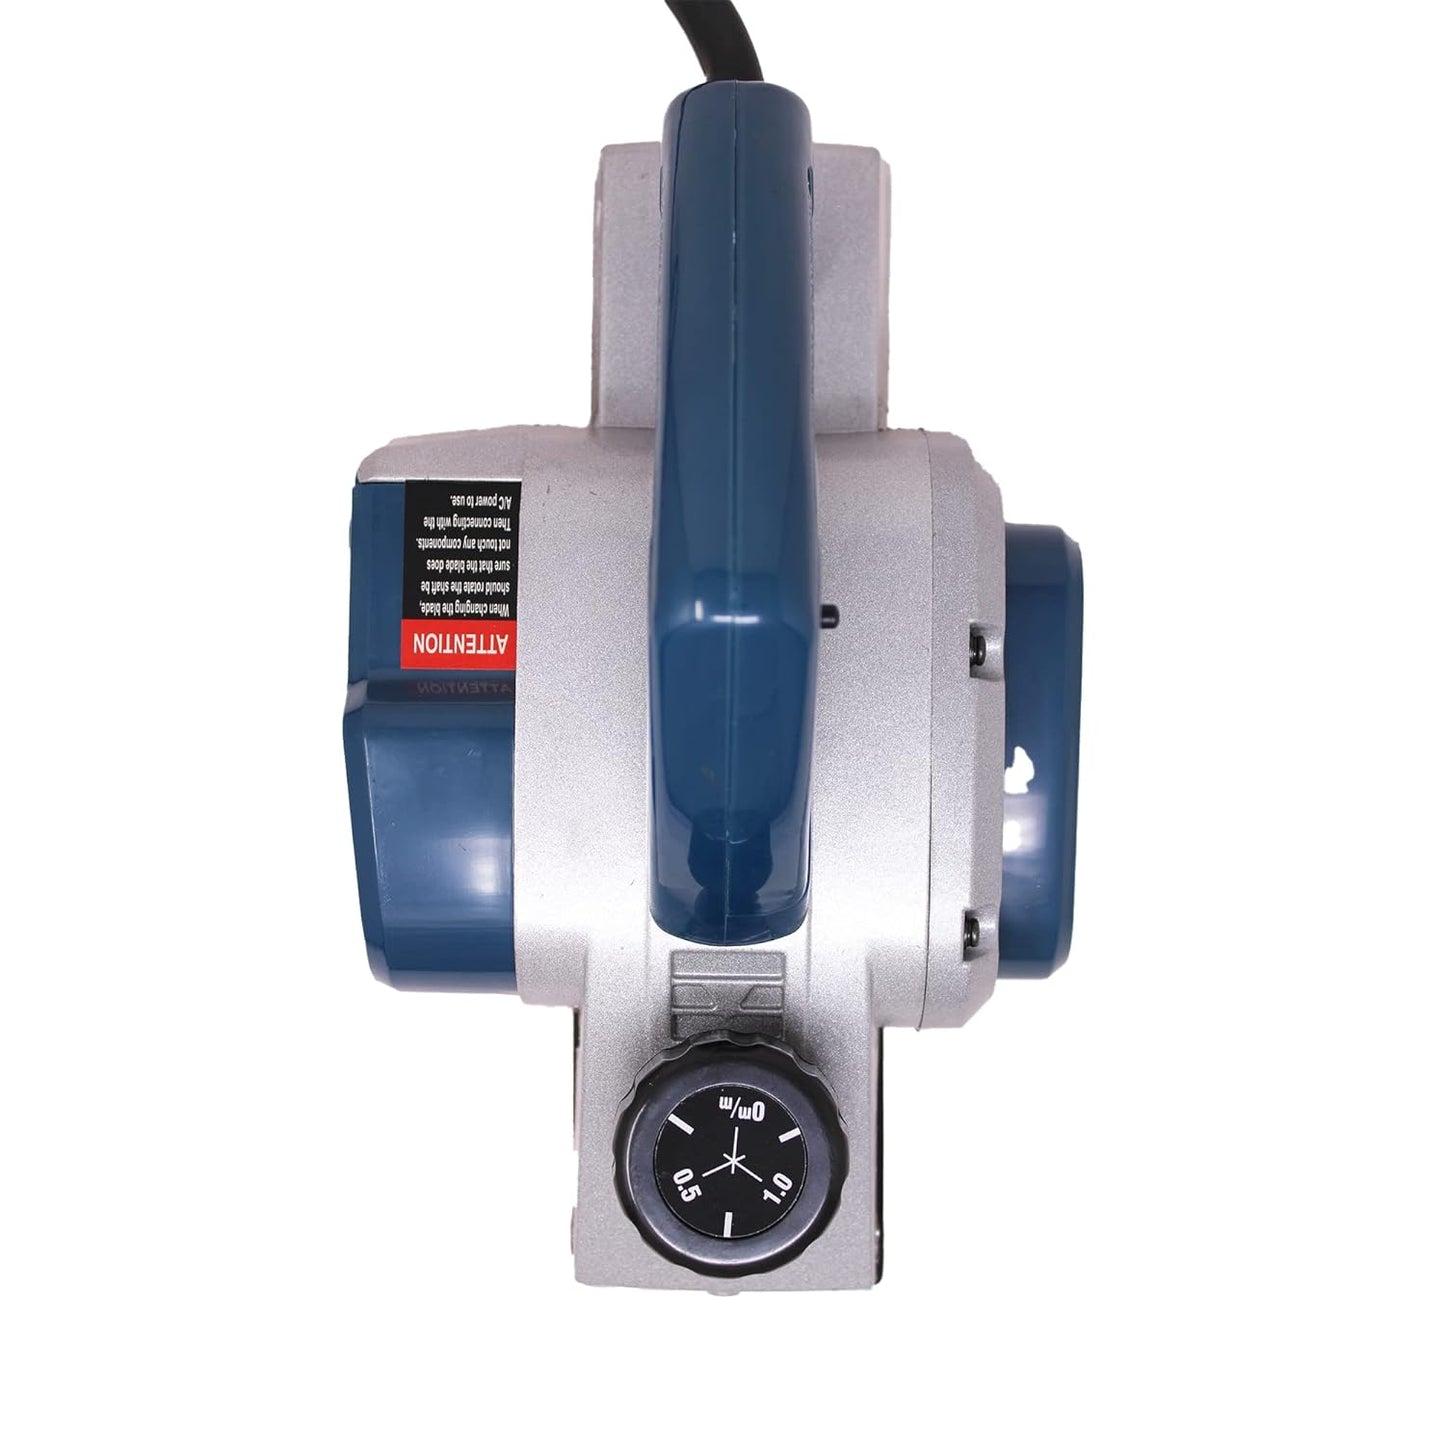 SPEAR SPC-MPF20 Metal Body Electric Hand Planer for Woodworking, 15000 RPM, Planing Width 0-82mm, Planning Depth: 0-1mm